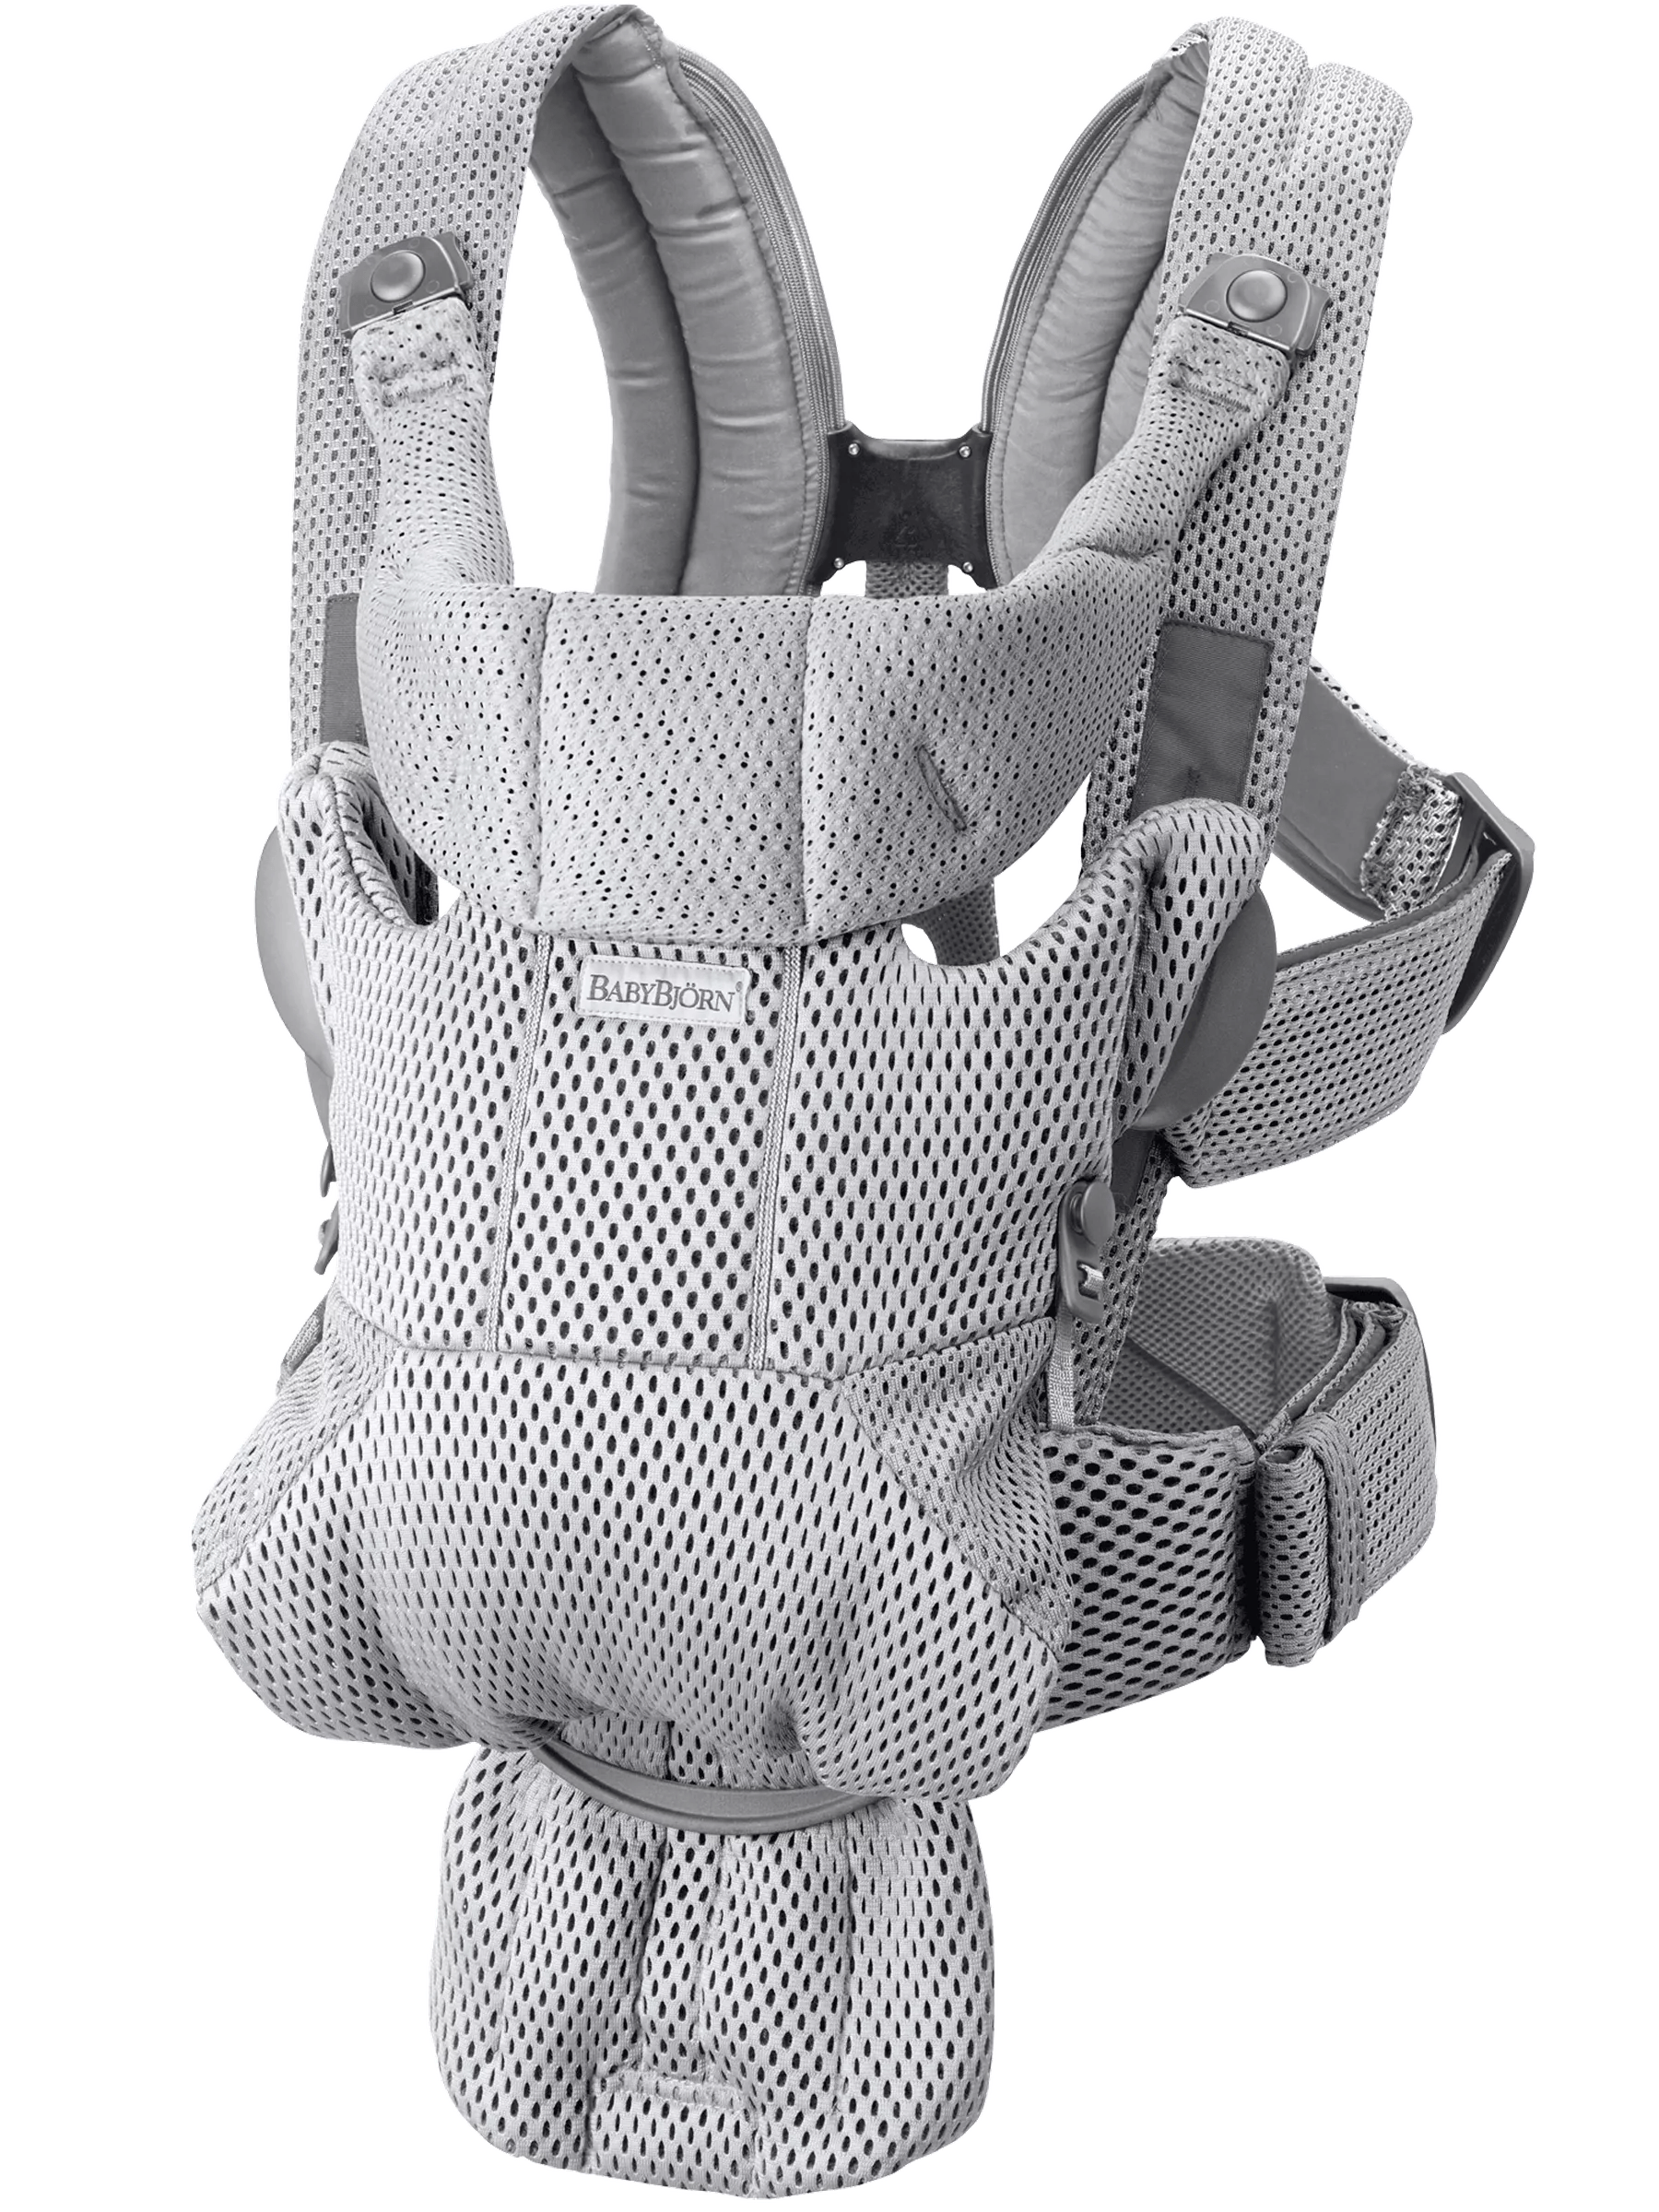 BabyBjorn Baby Carrier Free in Gray 3DMesh Product Image